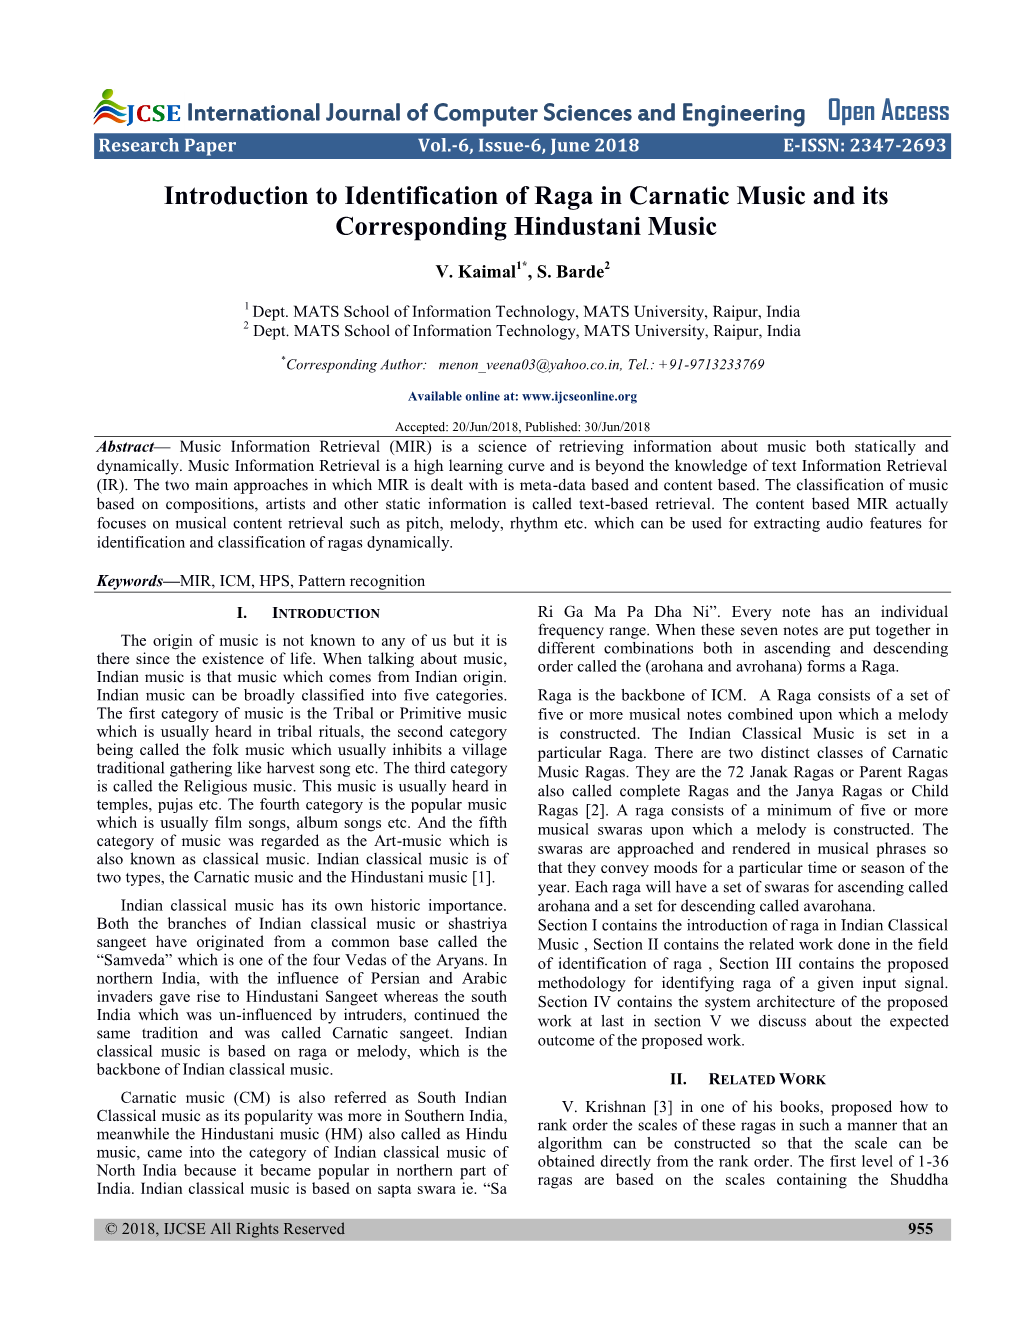 Introduction to Identification of Raga in Carnatic Music and Its Corresponding Hindustani Music